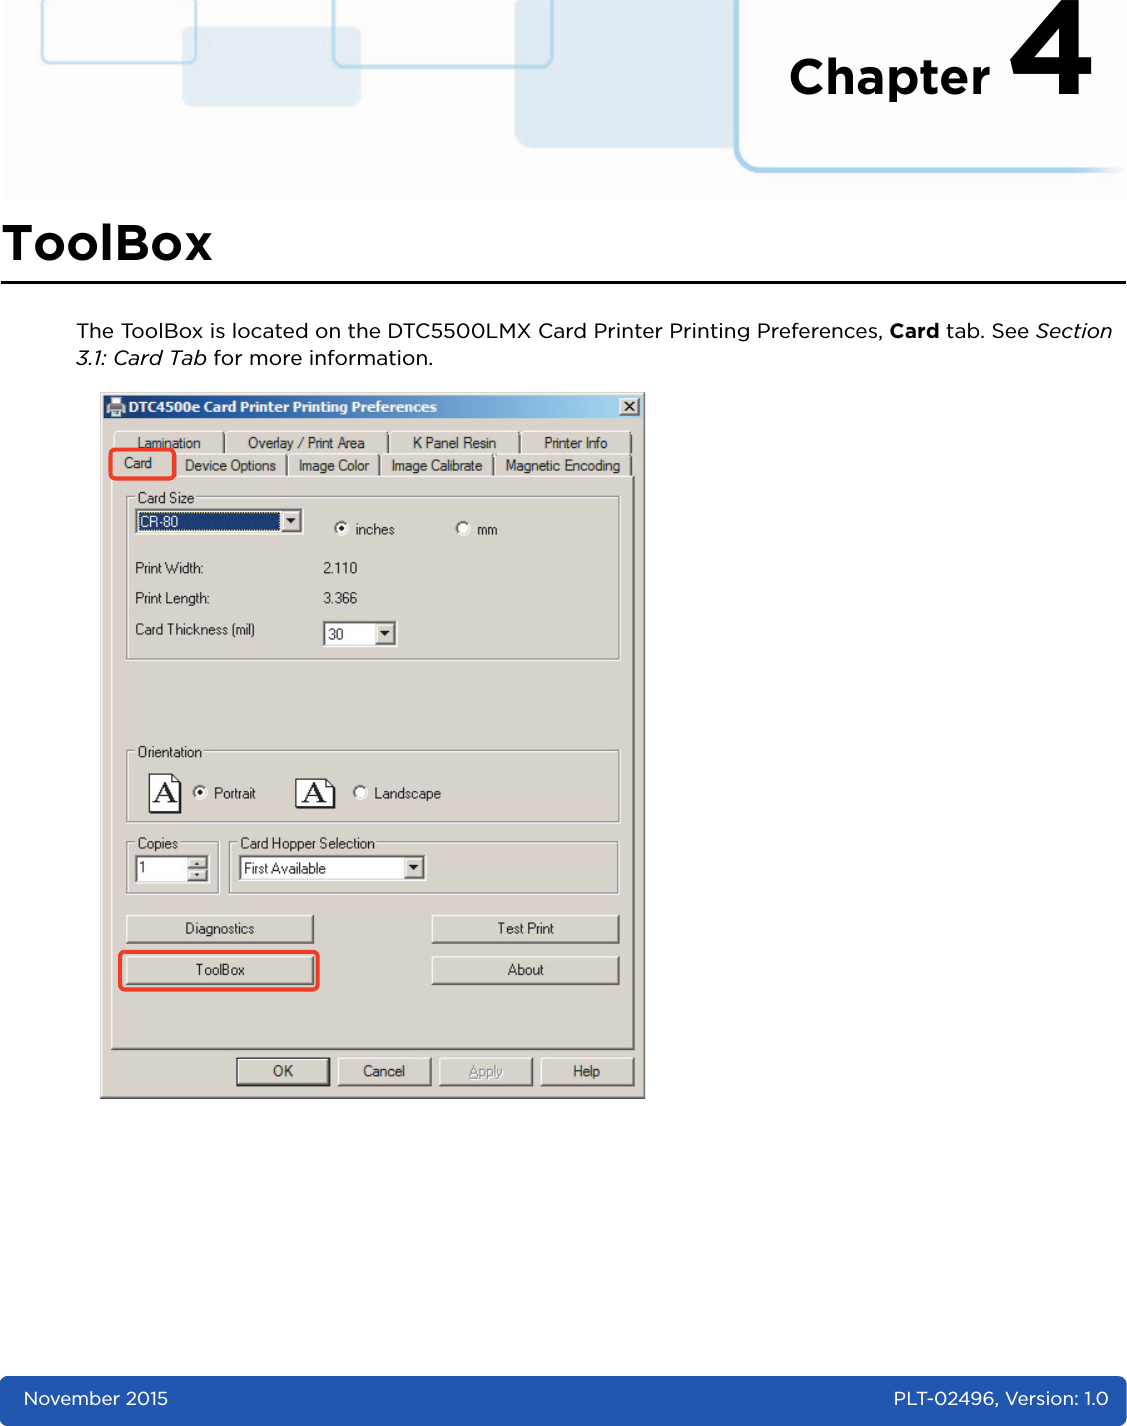 Chapter 4November 2015 PLT-02496, Version: 1.0ToolBoxThe ToolBox is located on the DTC5500LMX Card Printer Printing Preferences, Card tab. See Section 3.1: Card Tab for more information.